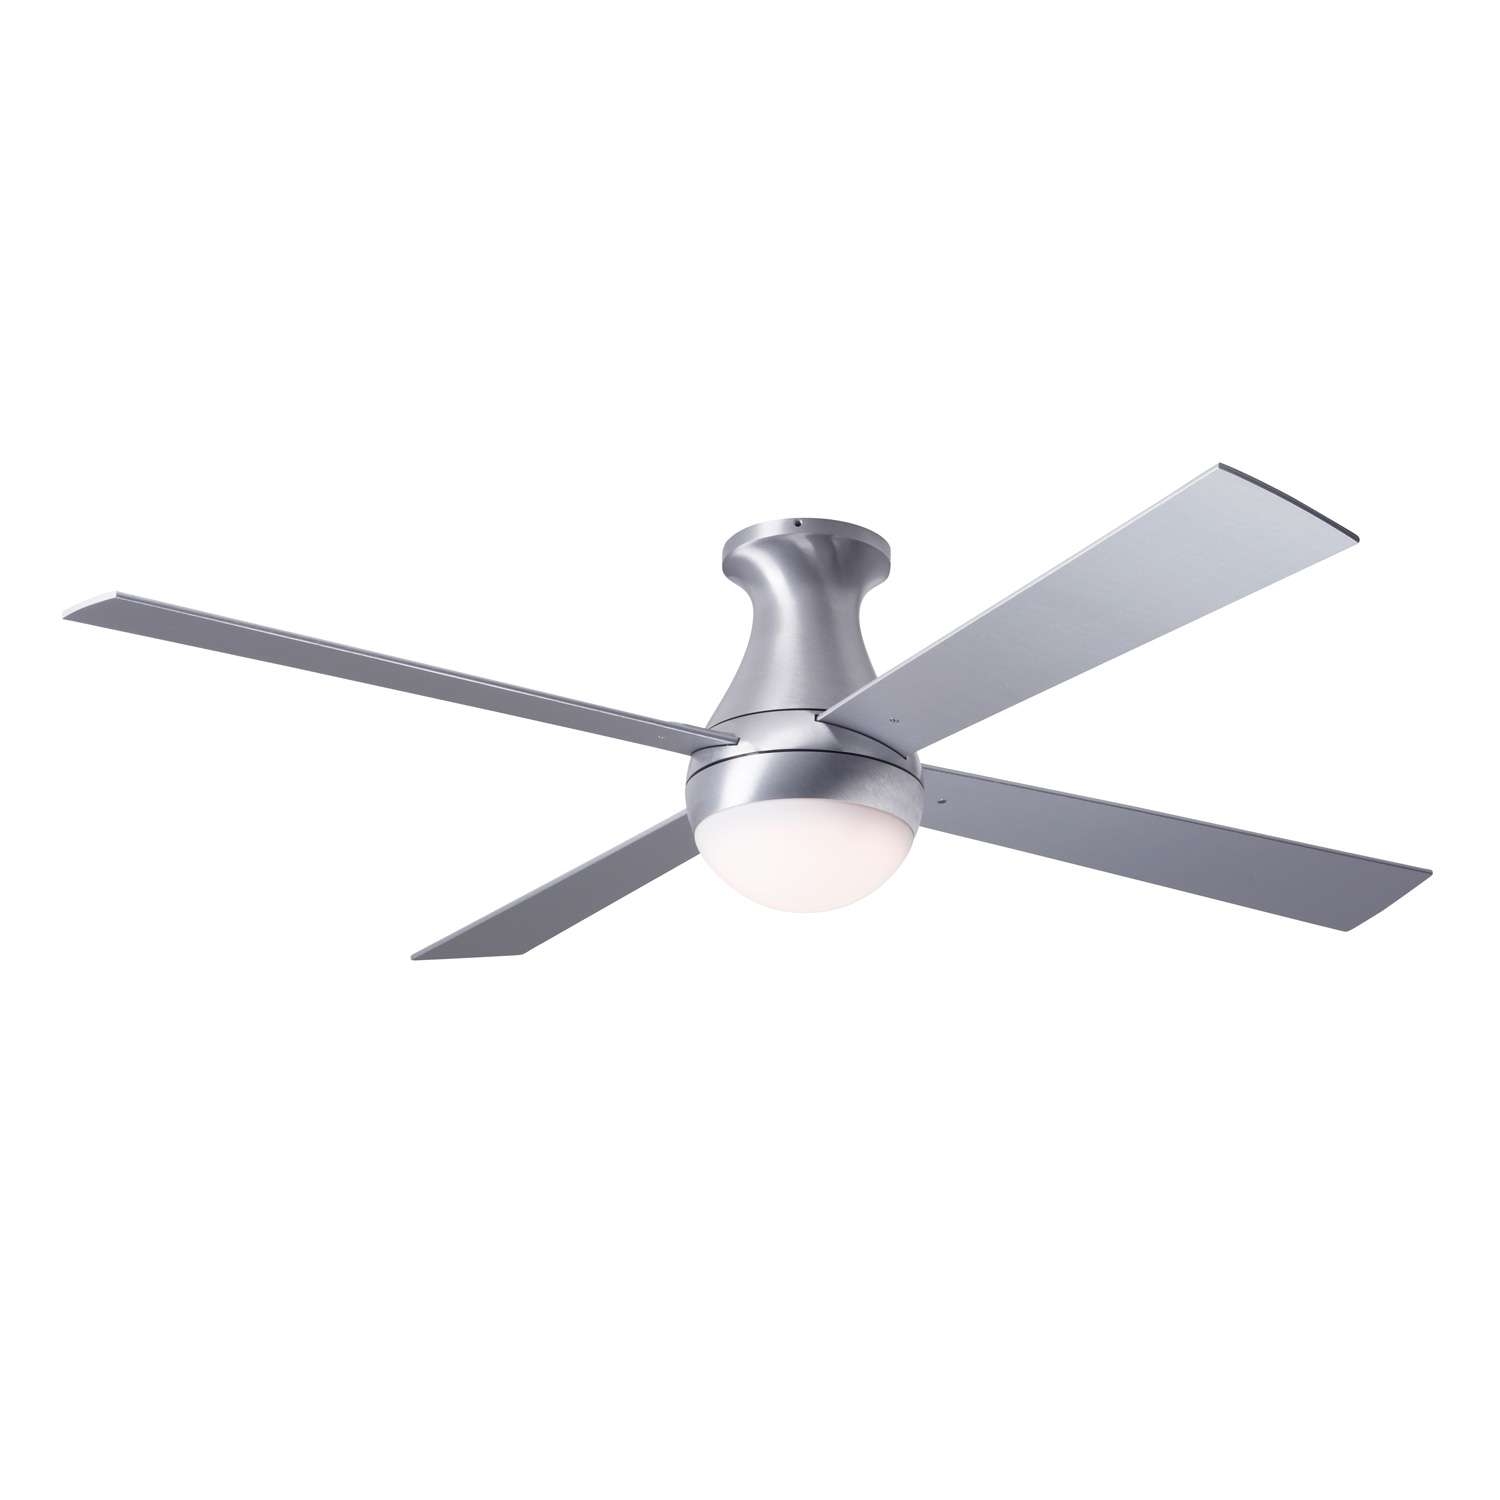 Permalink to Ball Hugger Ceiling Fan With Light